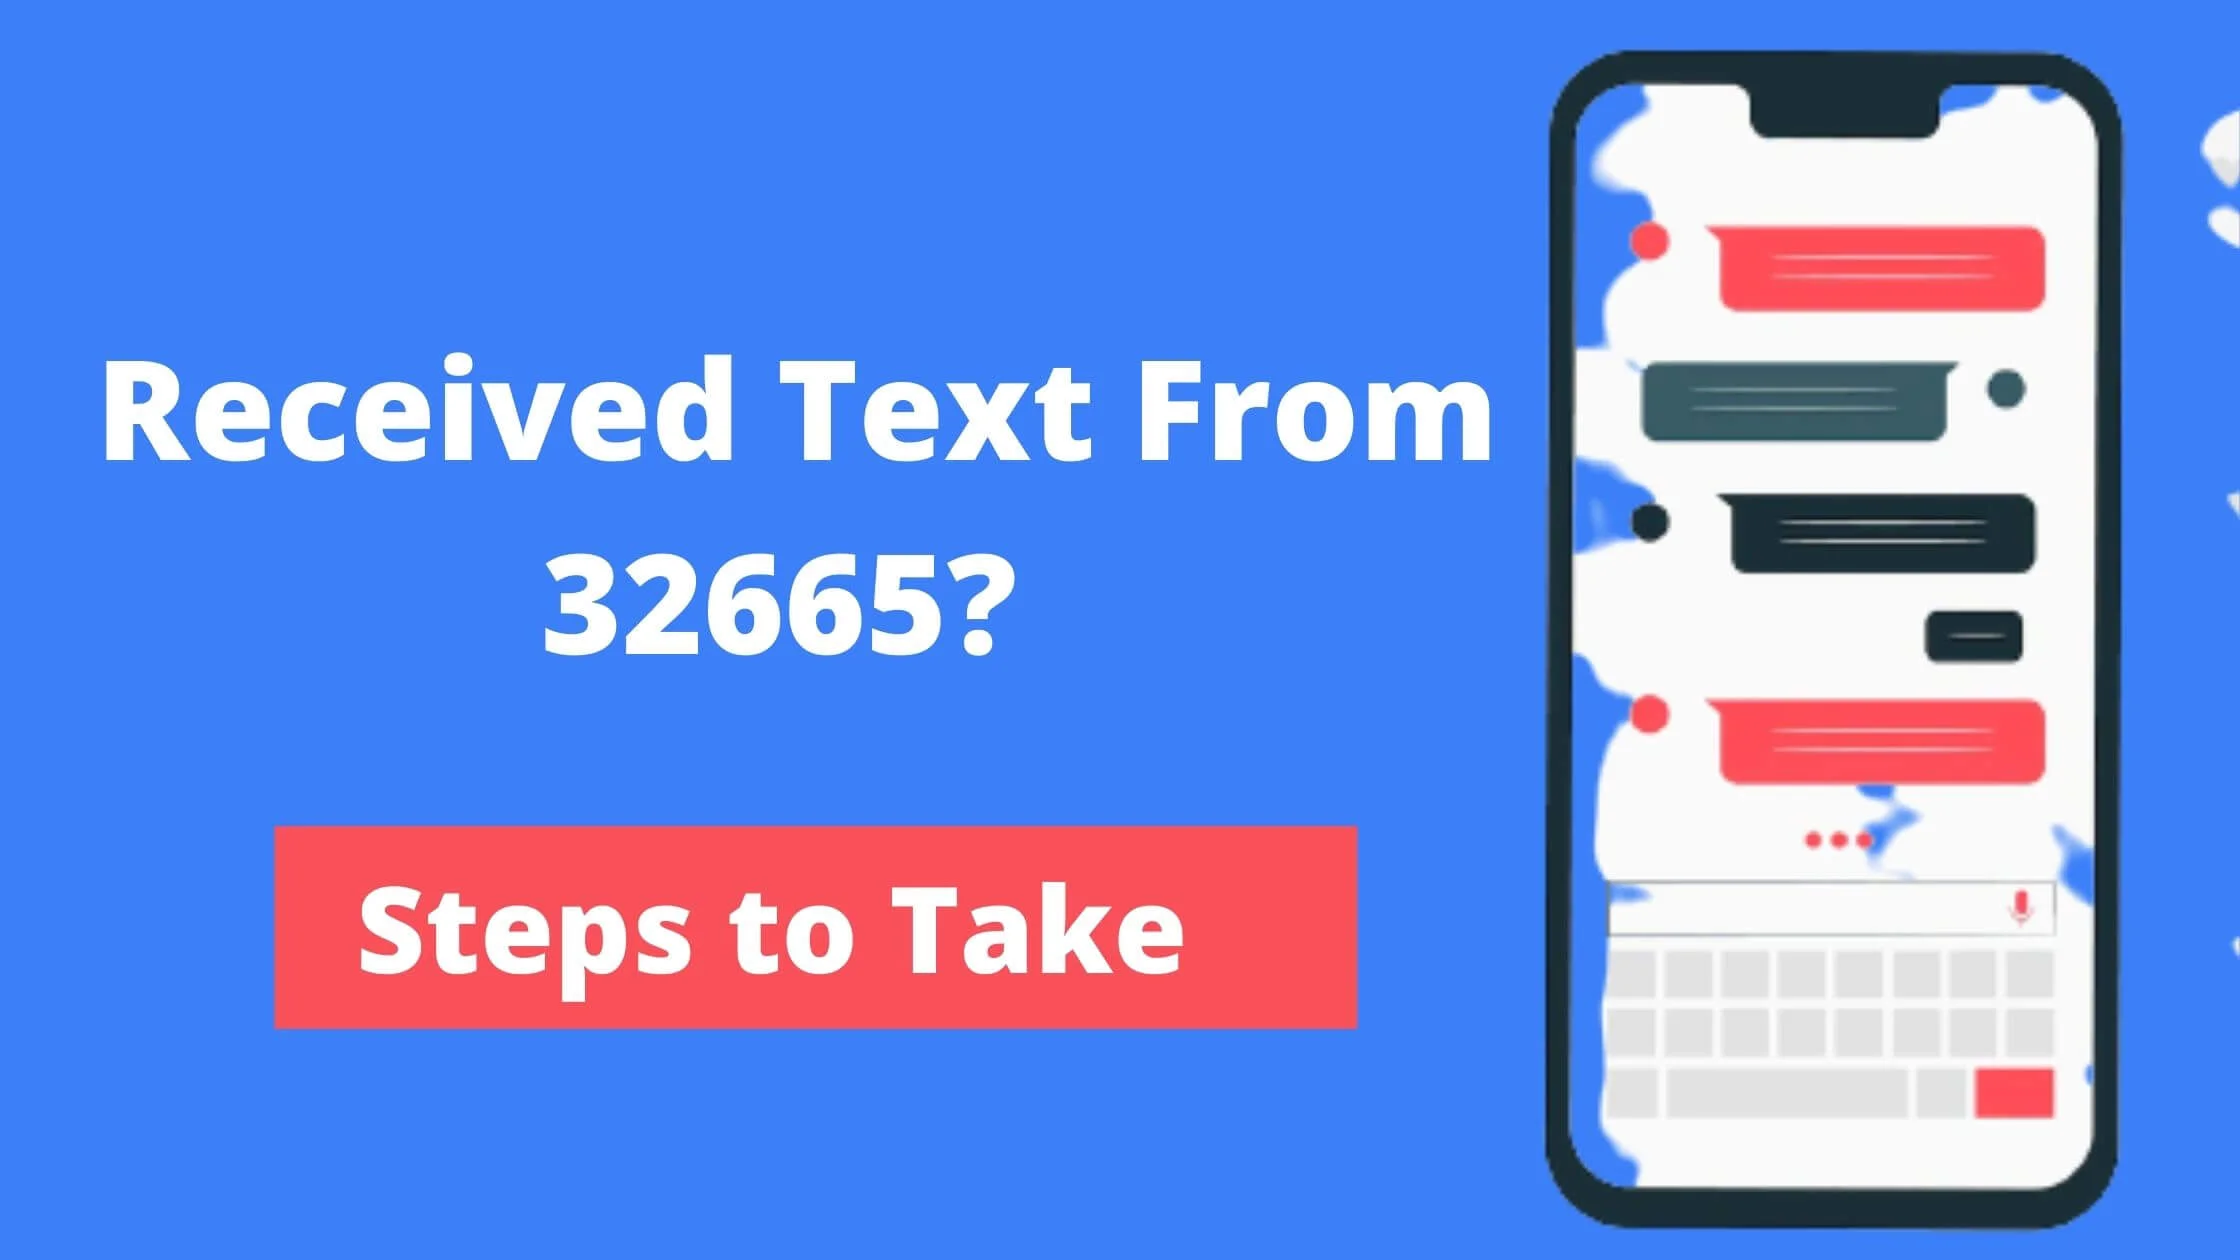 Received Text From 32665? Steps to Take